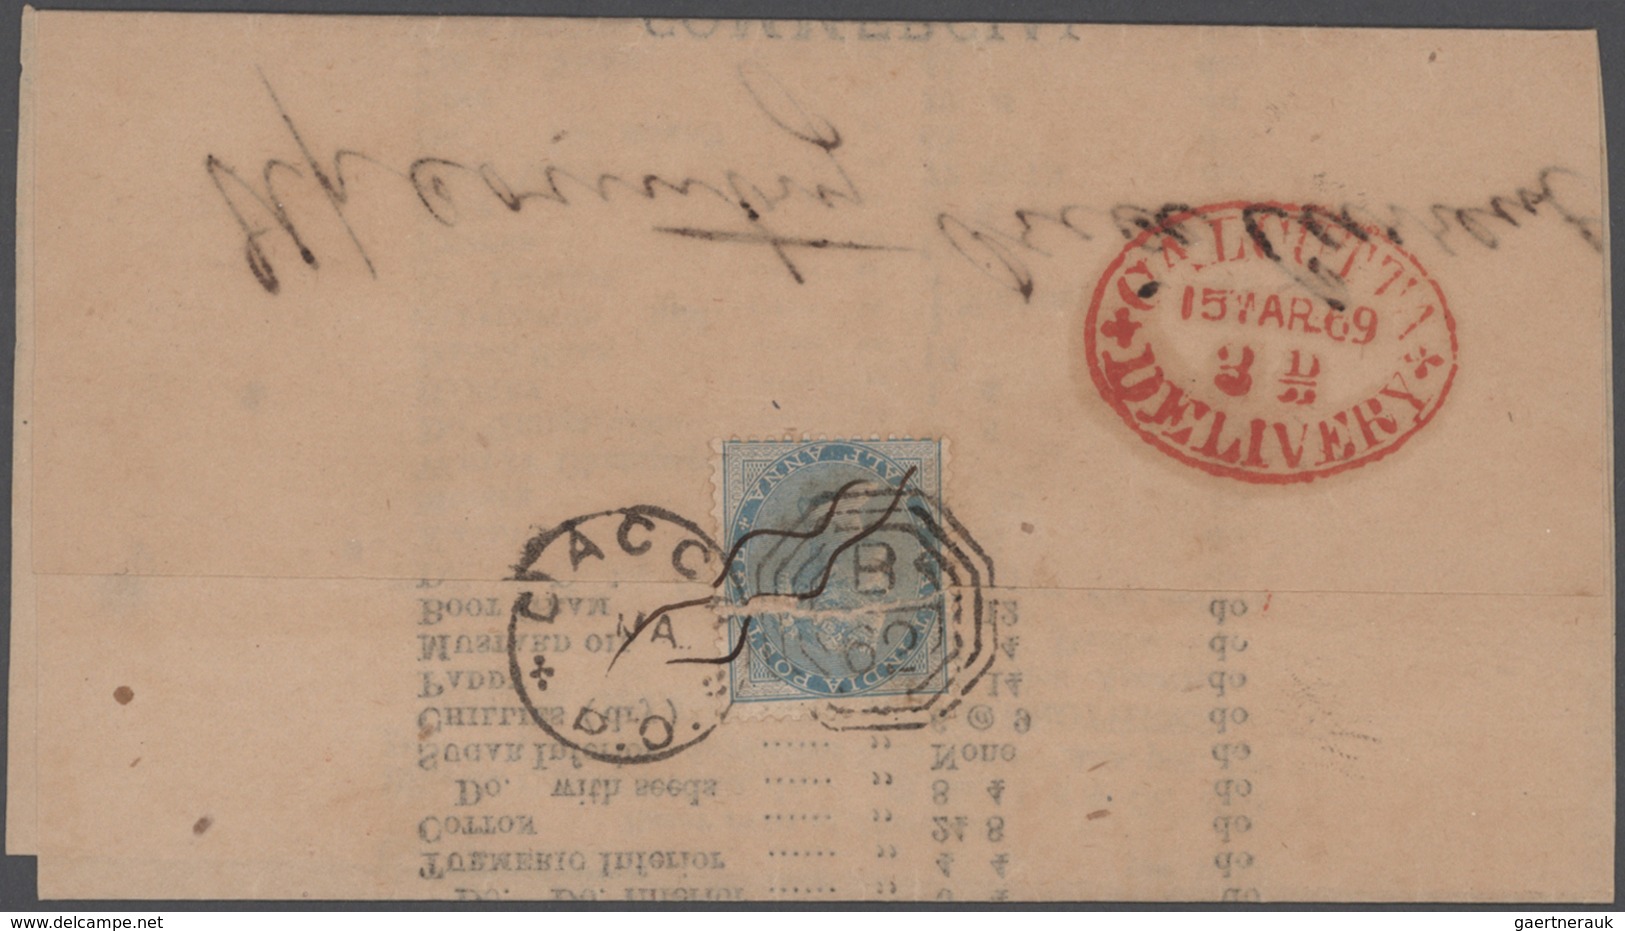 Indien: 1860-1946 ca.: More than 280 covers, postcards, picture postcards and postal stationery item